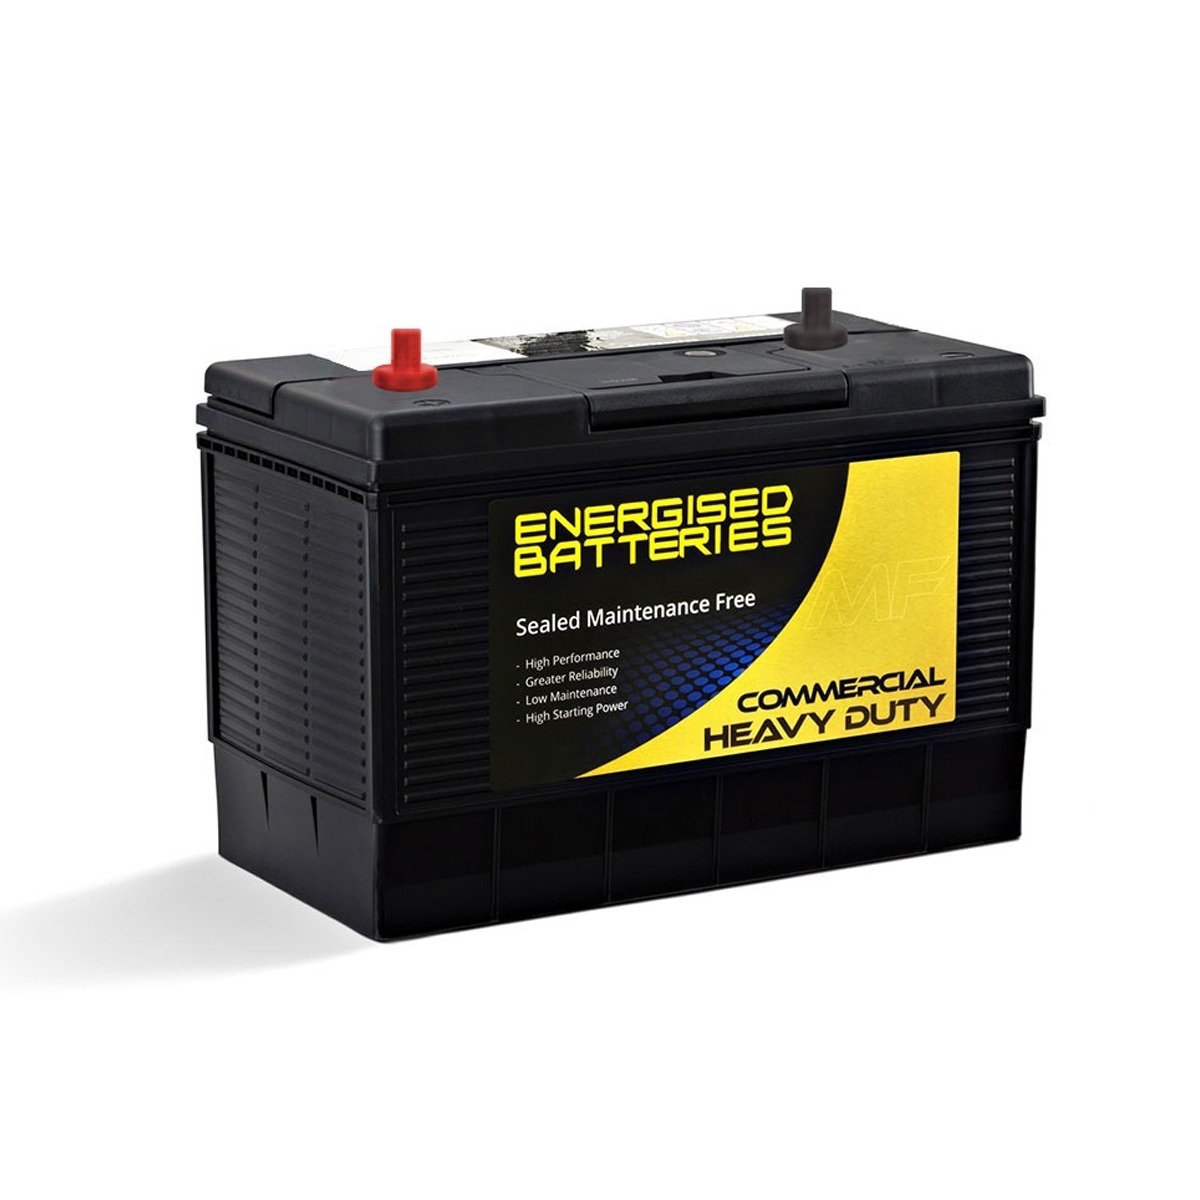 Heavy Duty Commercial Vehicle Batteries